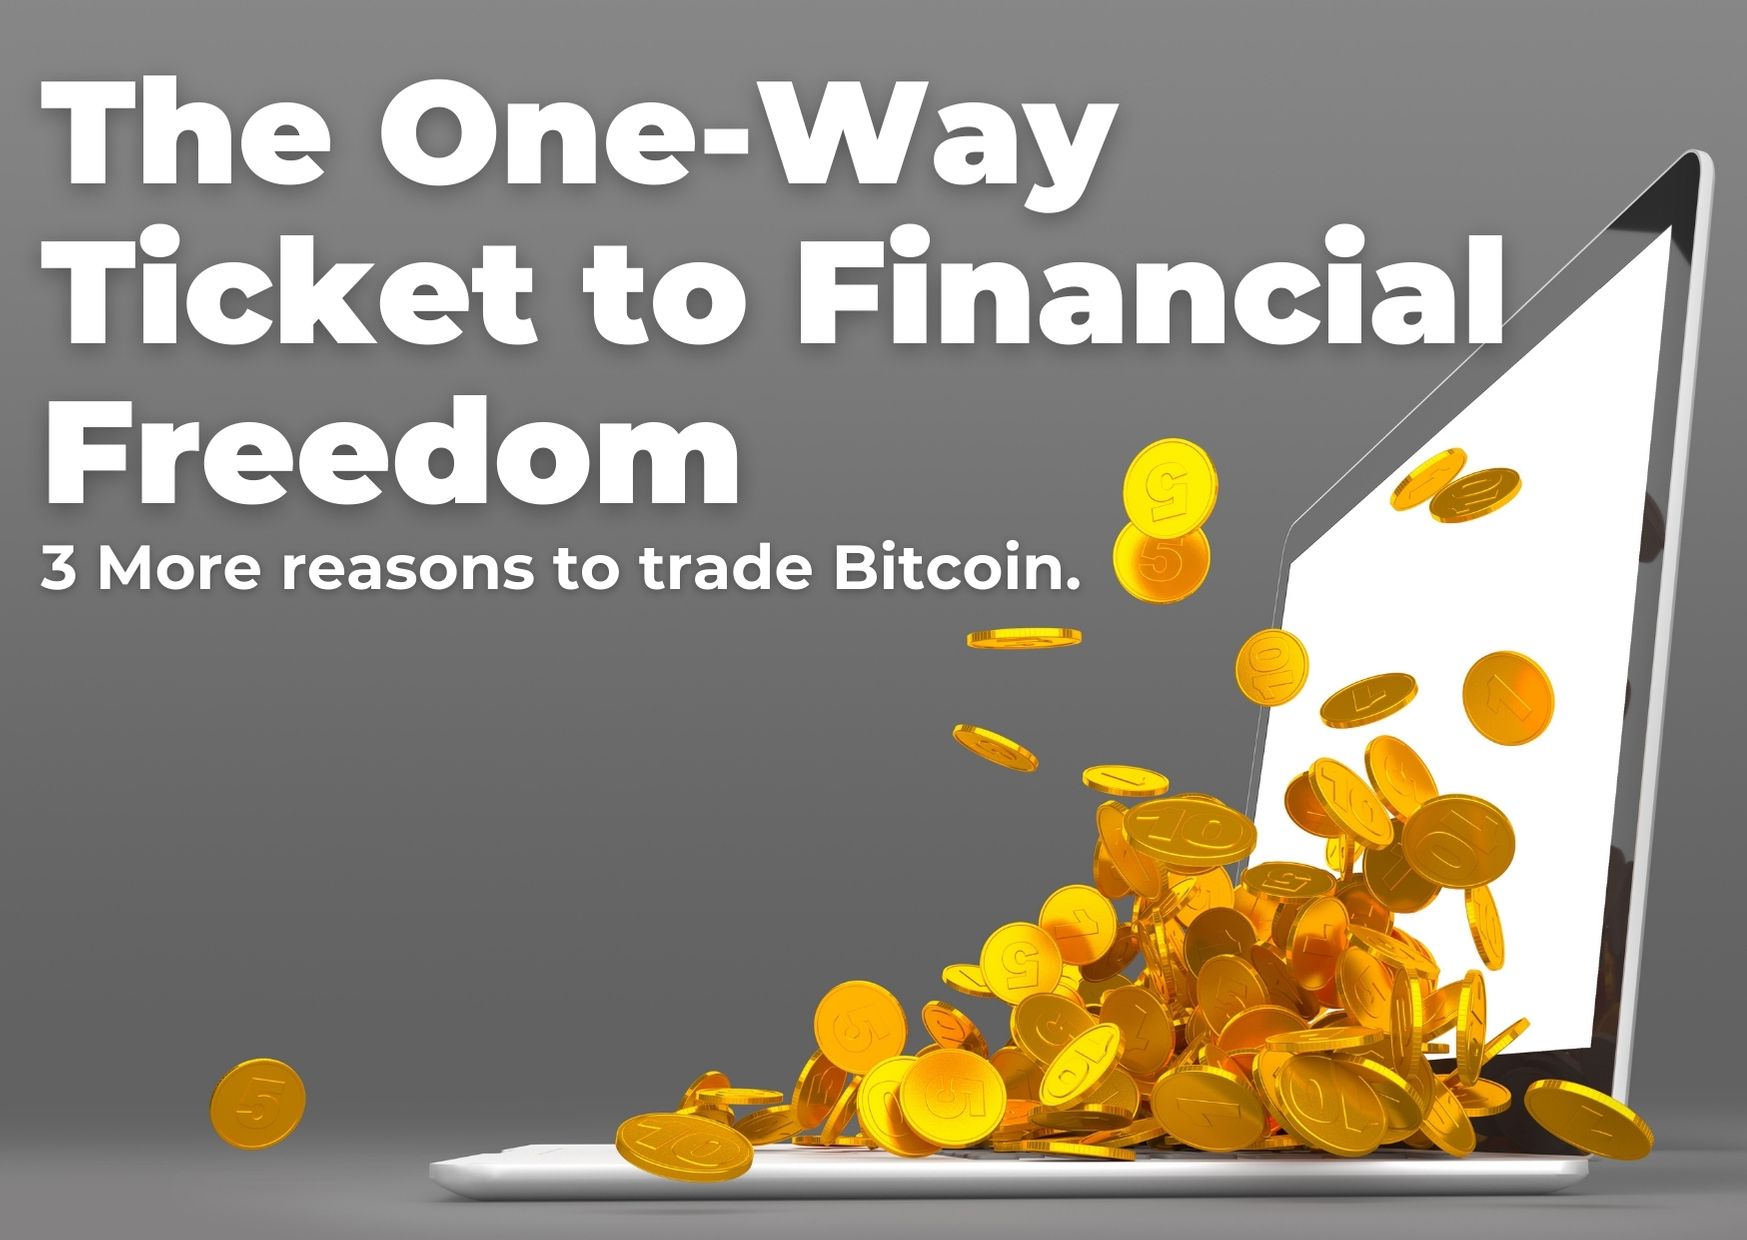 The One-Way Ticket to Financial Freedom